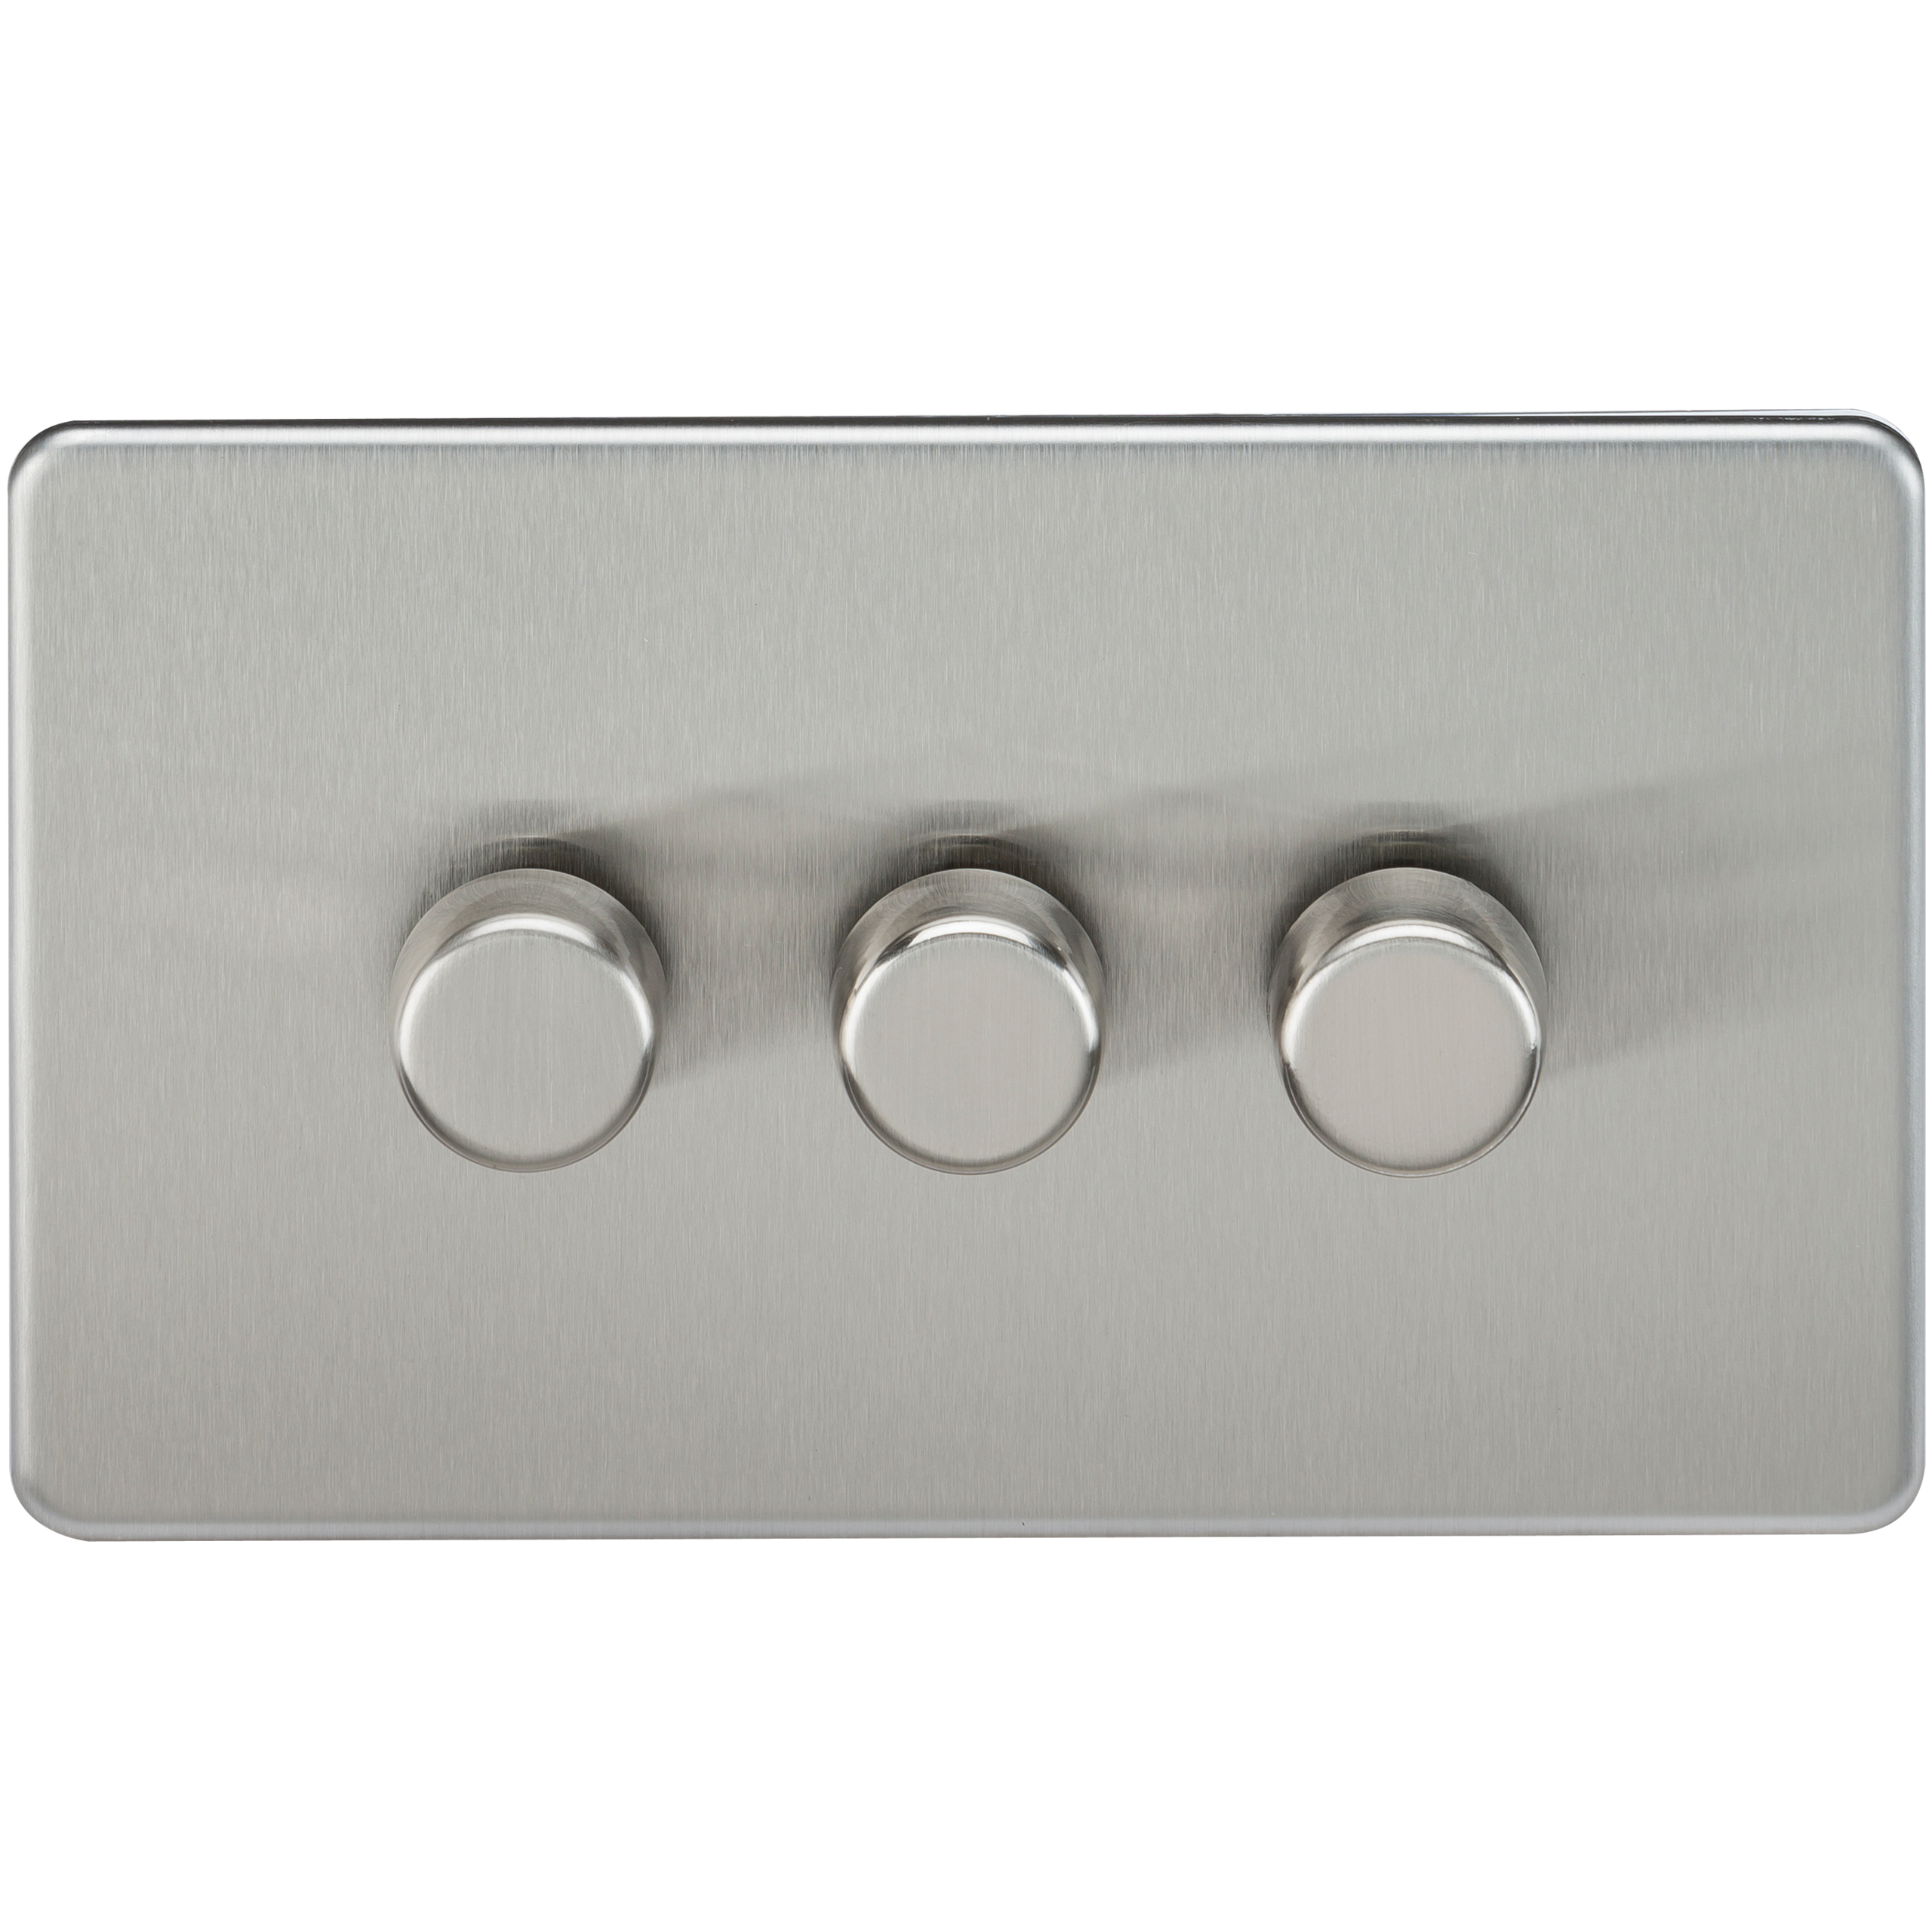 Screwless 3G 2-Way 40-400W Dimmer Switch - Brushed Chrome - SF2173BC 